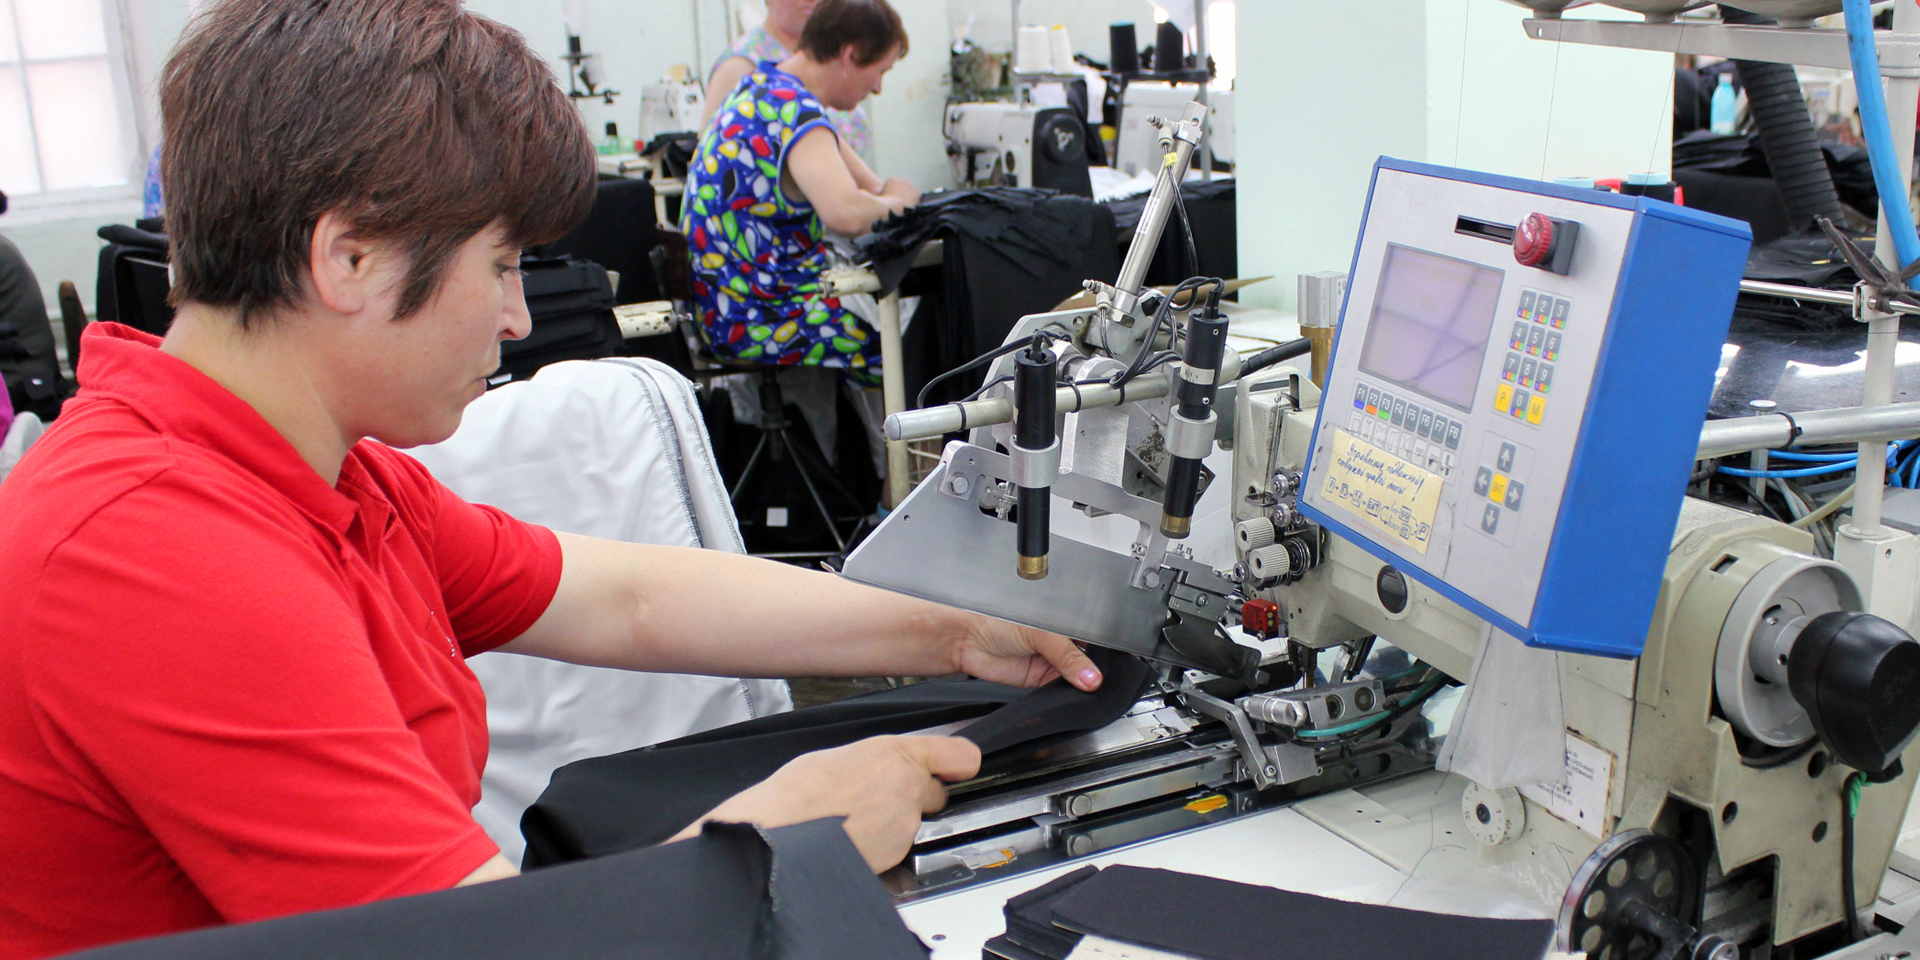 A person using an advanced sewing machine with a blue control panel in front of her.